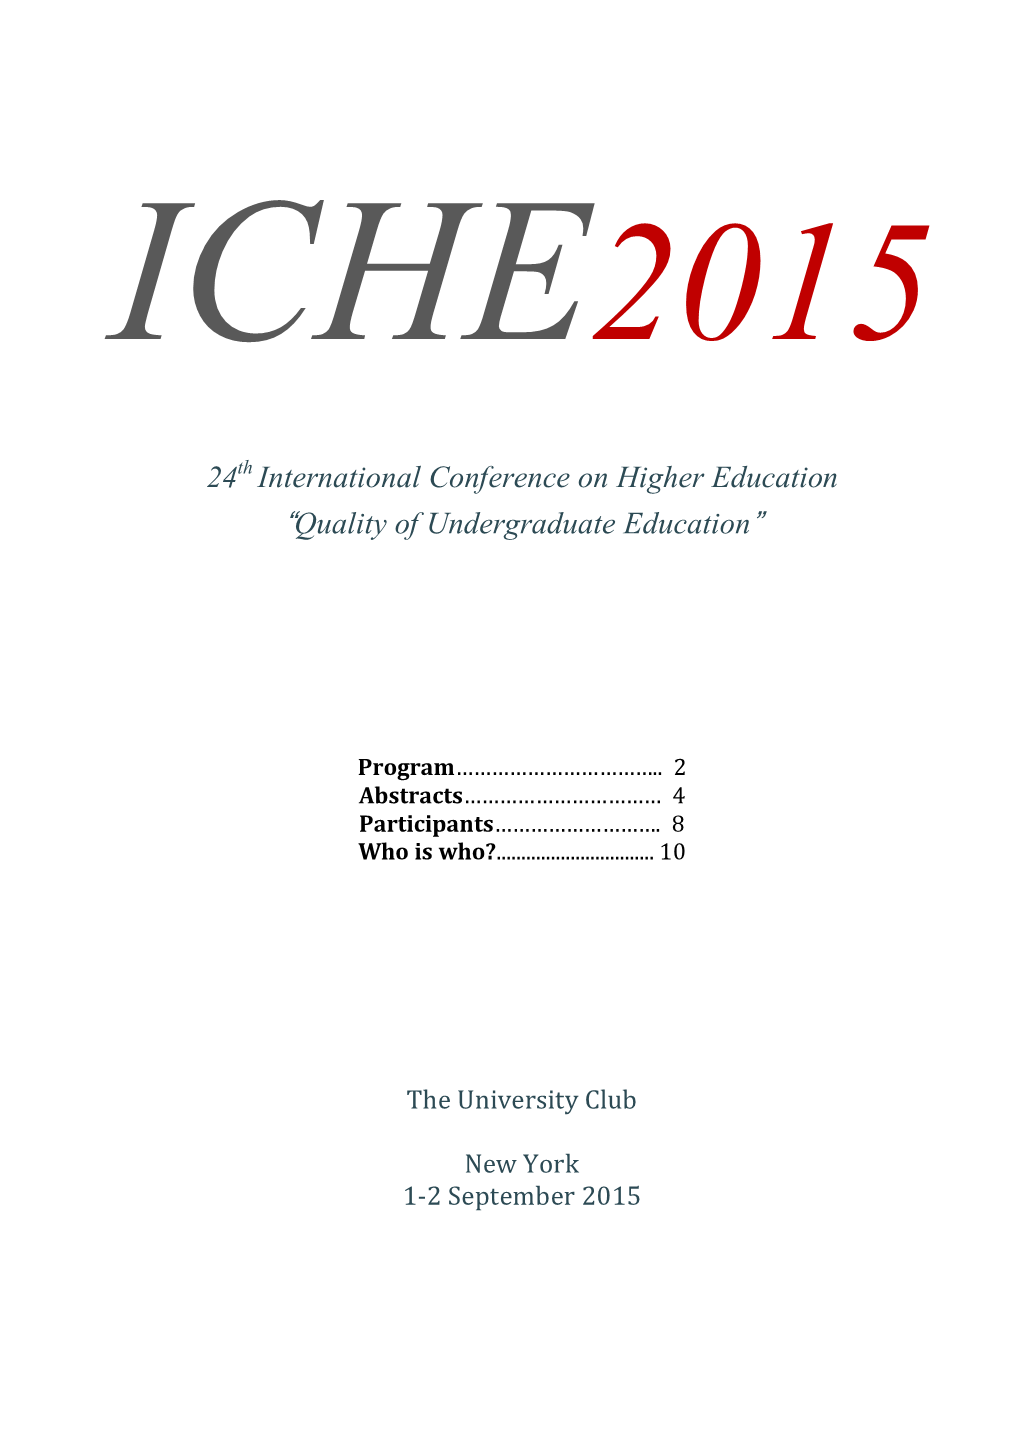 24 International Conference on Higher Education “Quality of Undergraduate Education”